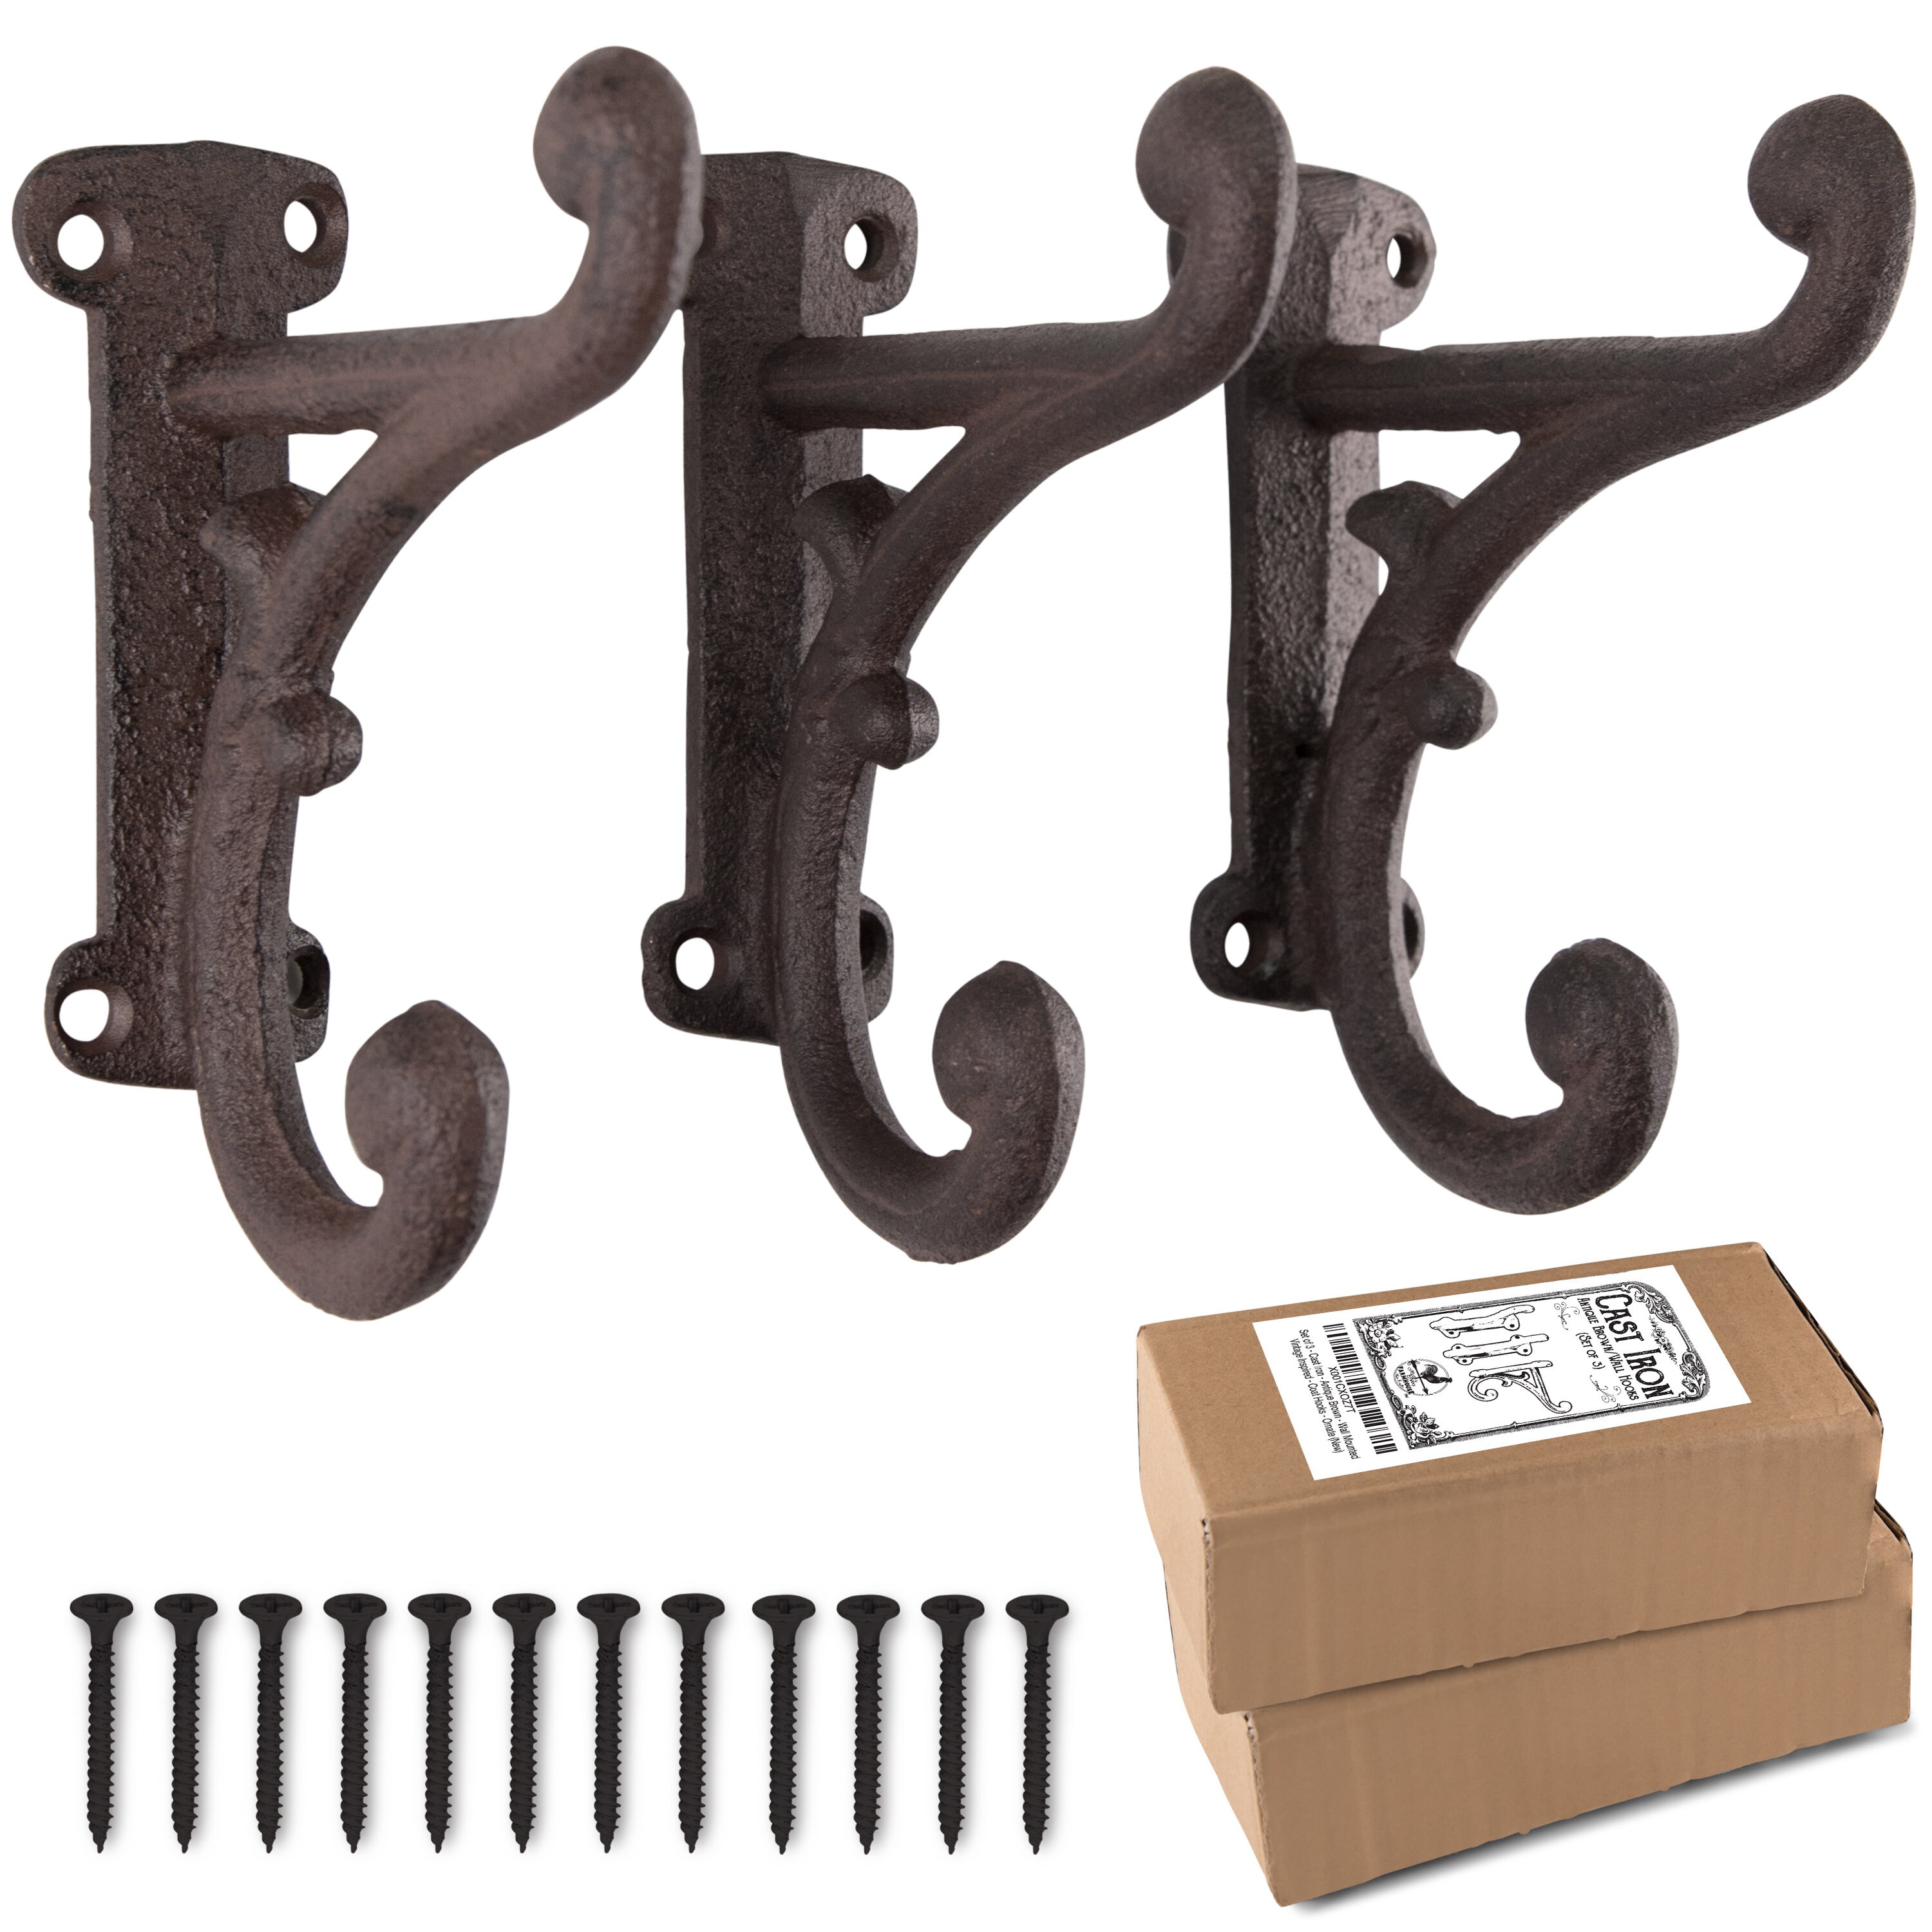 Rustic Cast Iron Coat Hooks 3 Pack Wall Mounted Farmhouse Decorative Wall  Hooks W/ Screws, Vintage Hooks for Hanging Coats antique Brown 